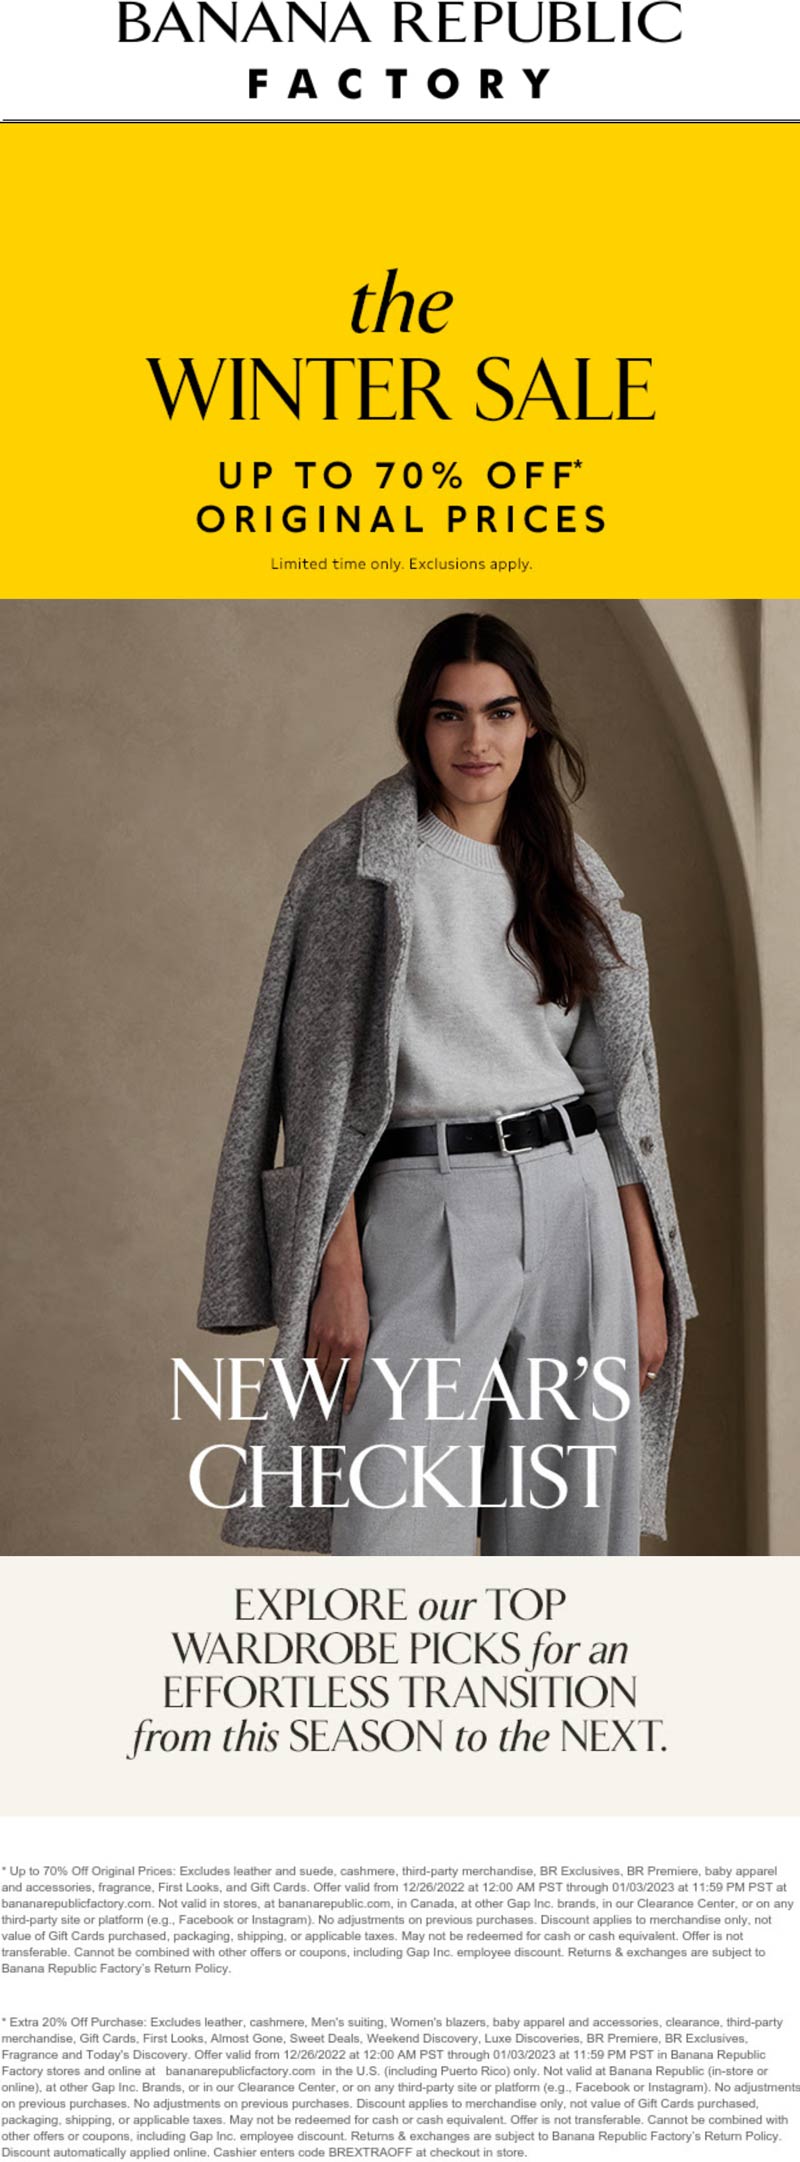 Banana Republic Factory coupons & promo code for [January 2023]